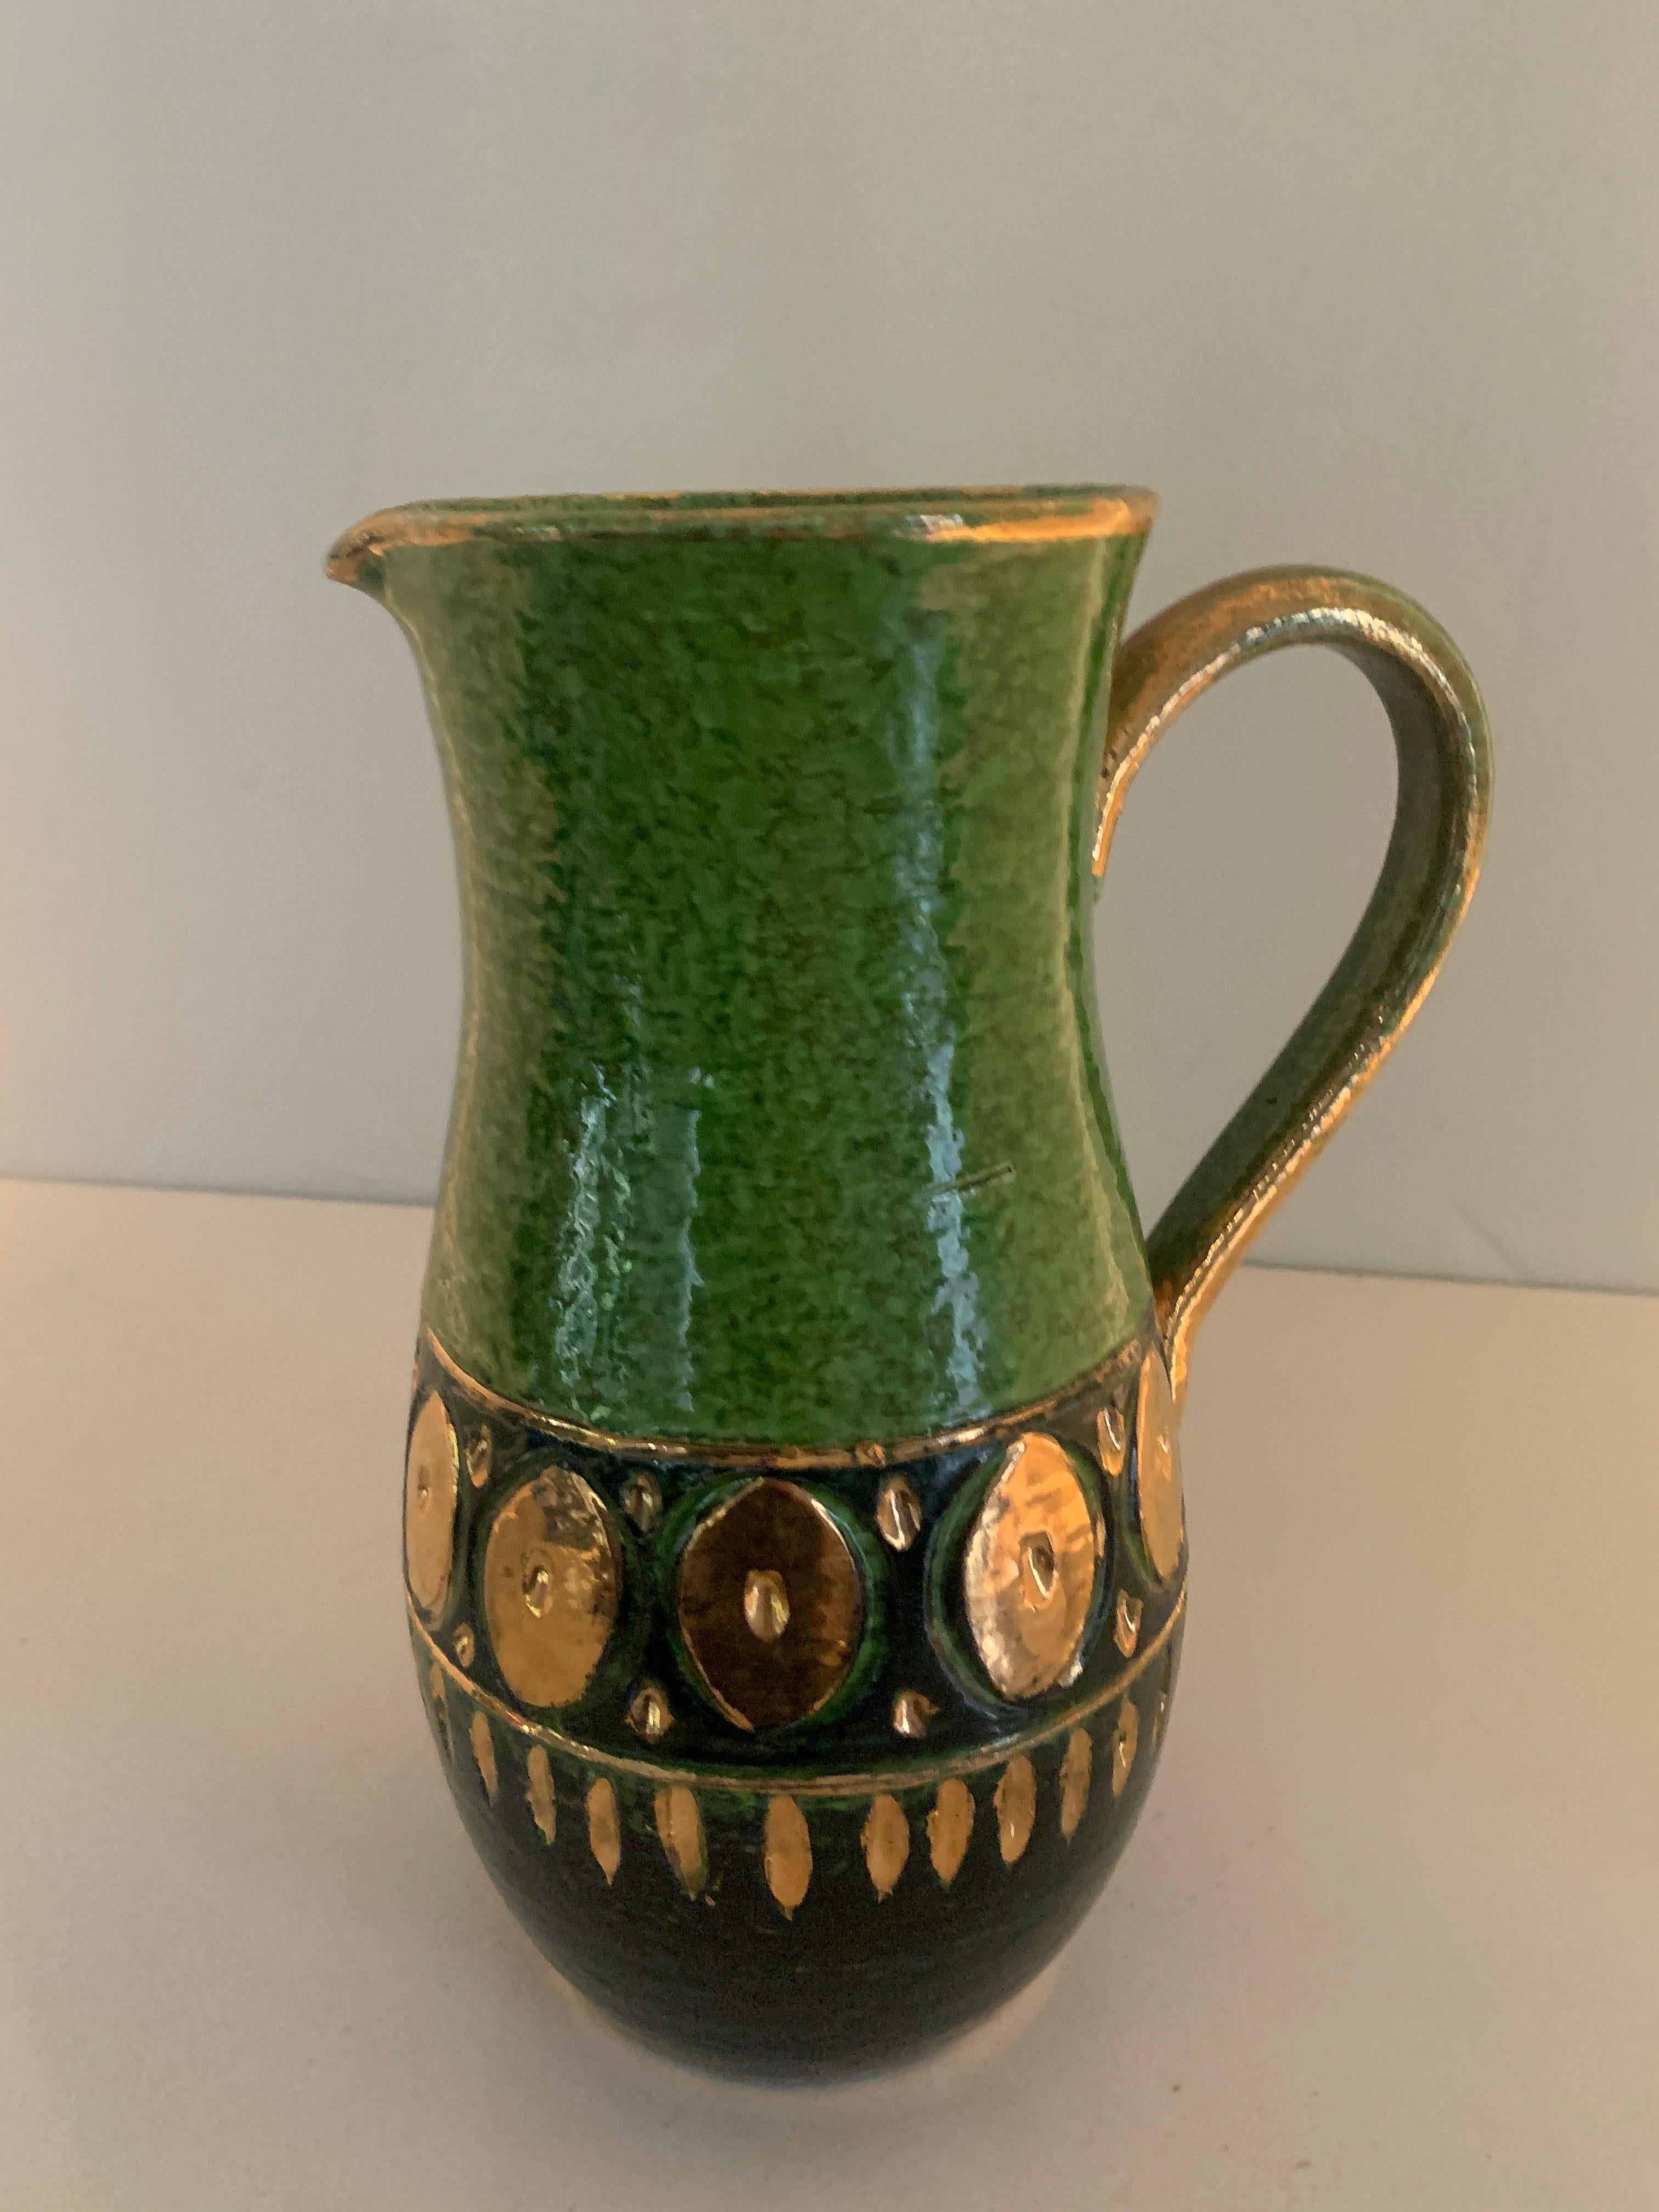 A very nice Bitossi Ceramic Pitcher. One of the best color combinations and designs we have acquired. A compliment to any table or bar setting. The unique green with gold accents is very nice and a Wonderfull mid century representation.